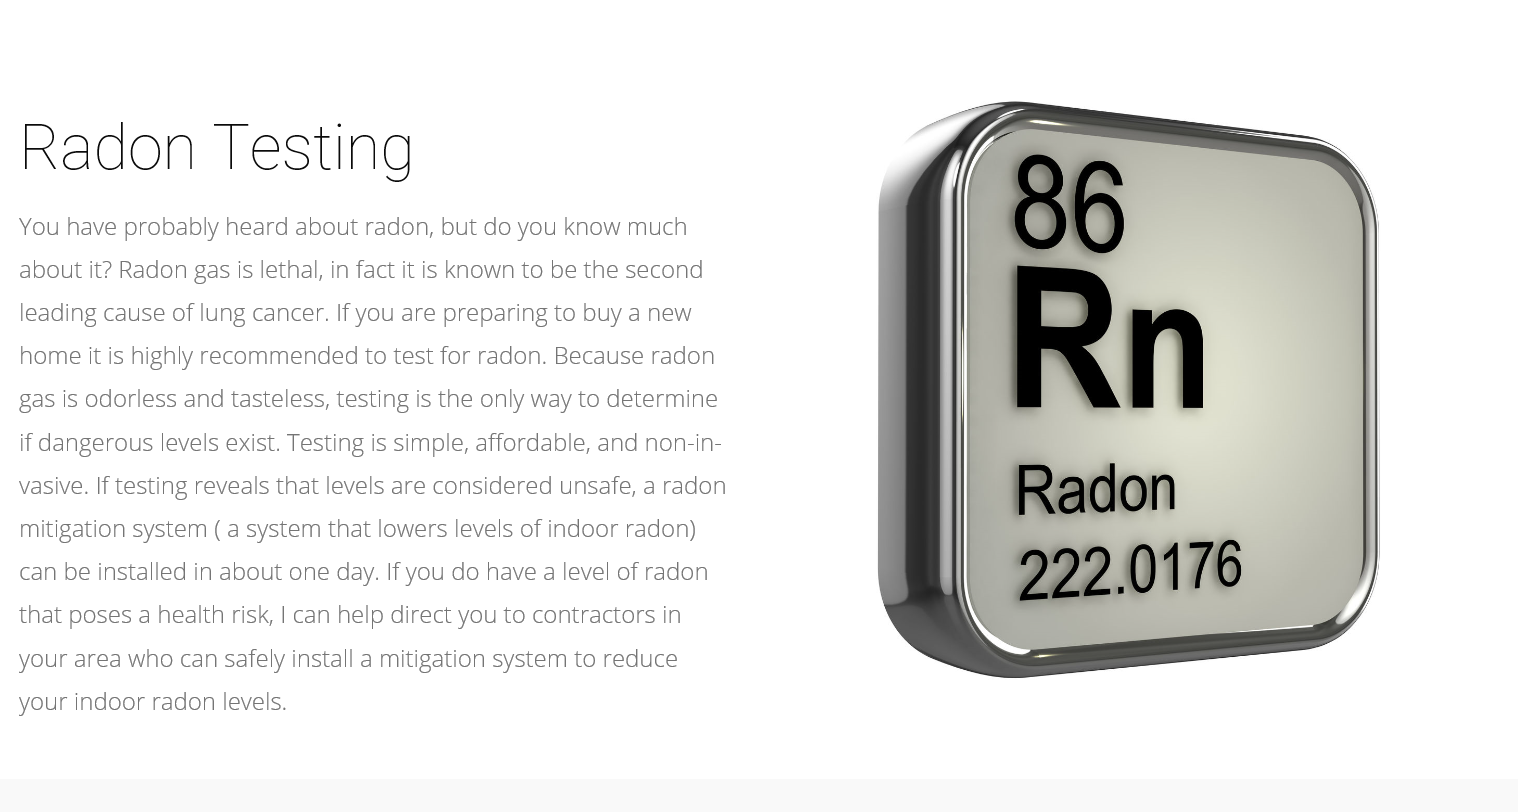 The element Radon from the element chart.